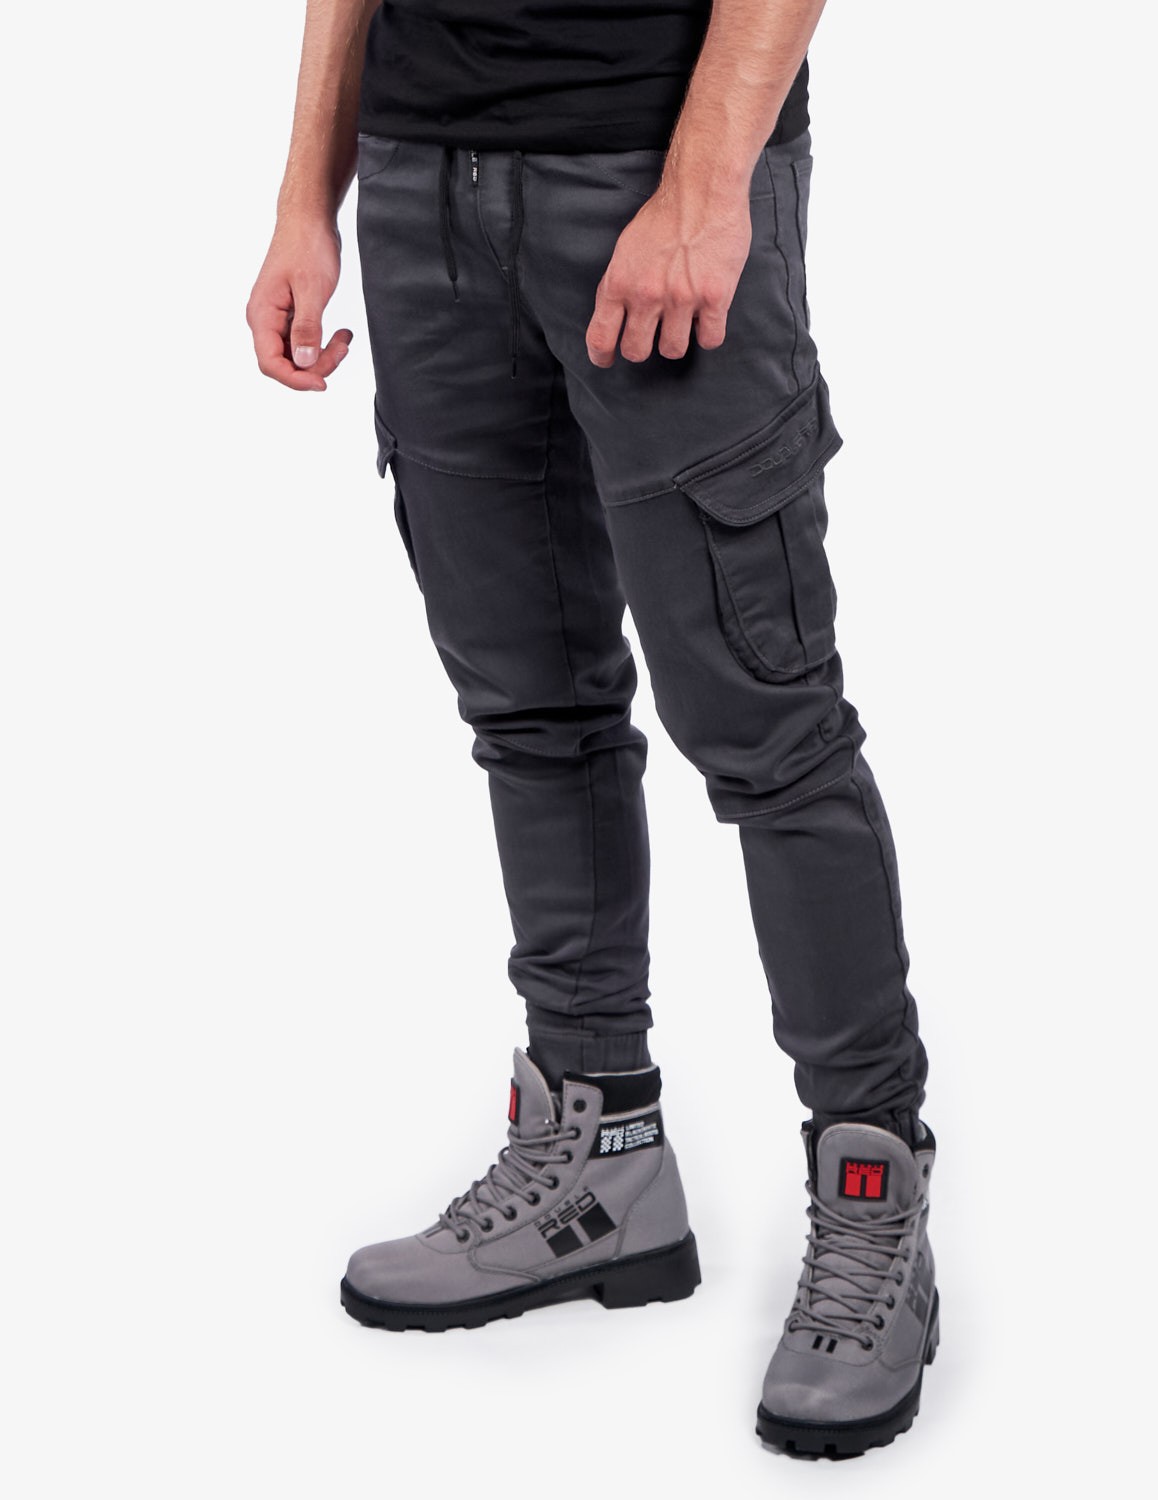 Pants ARMY STYLE Pockets Steel Grey